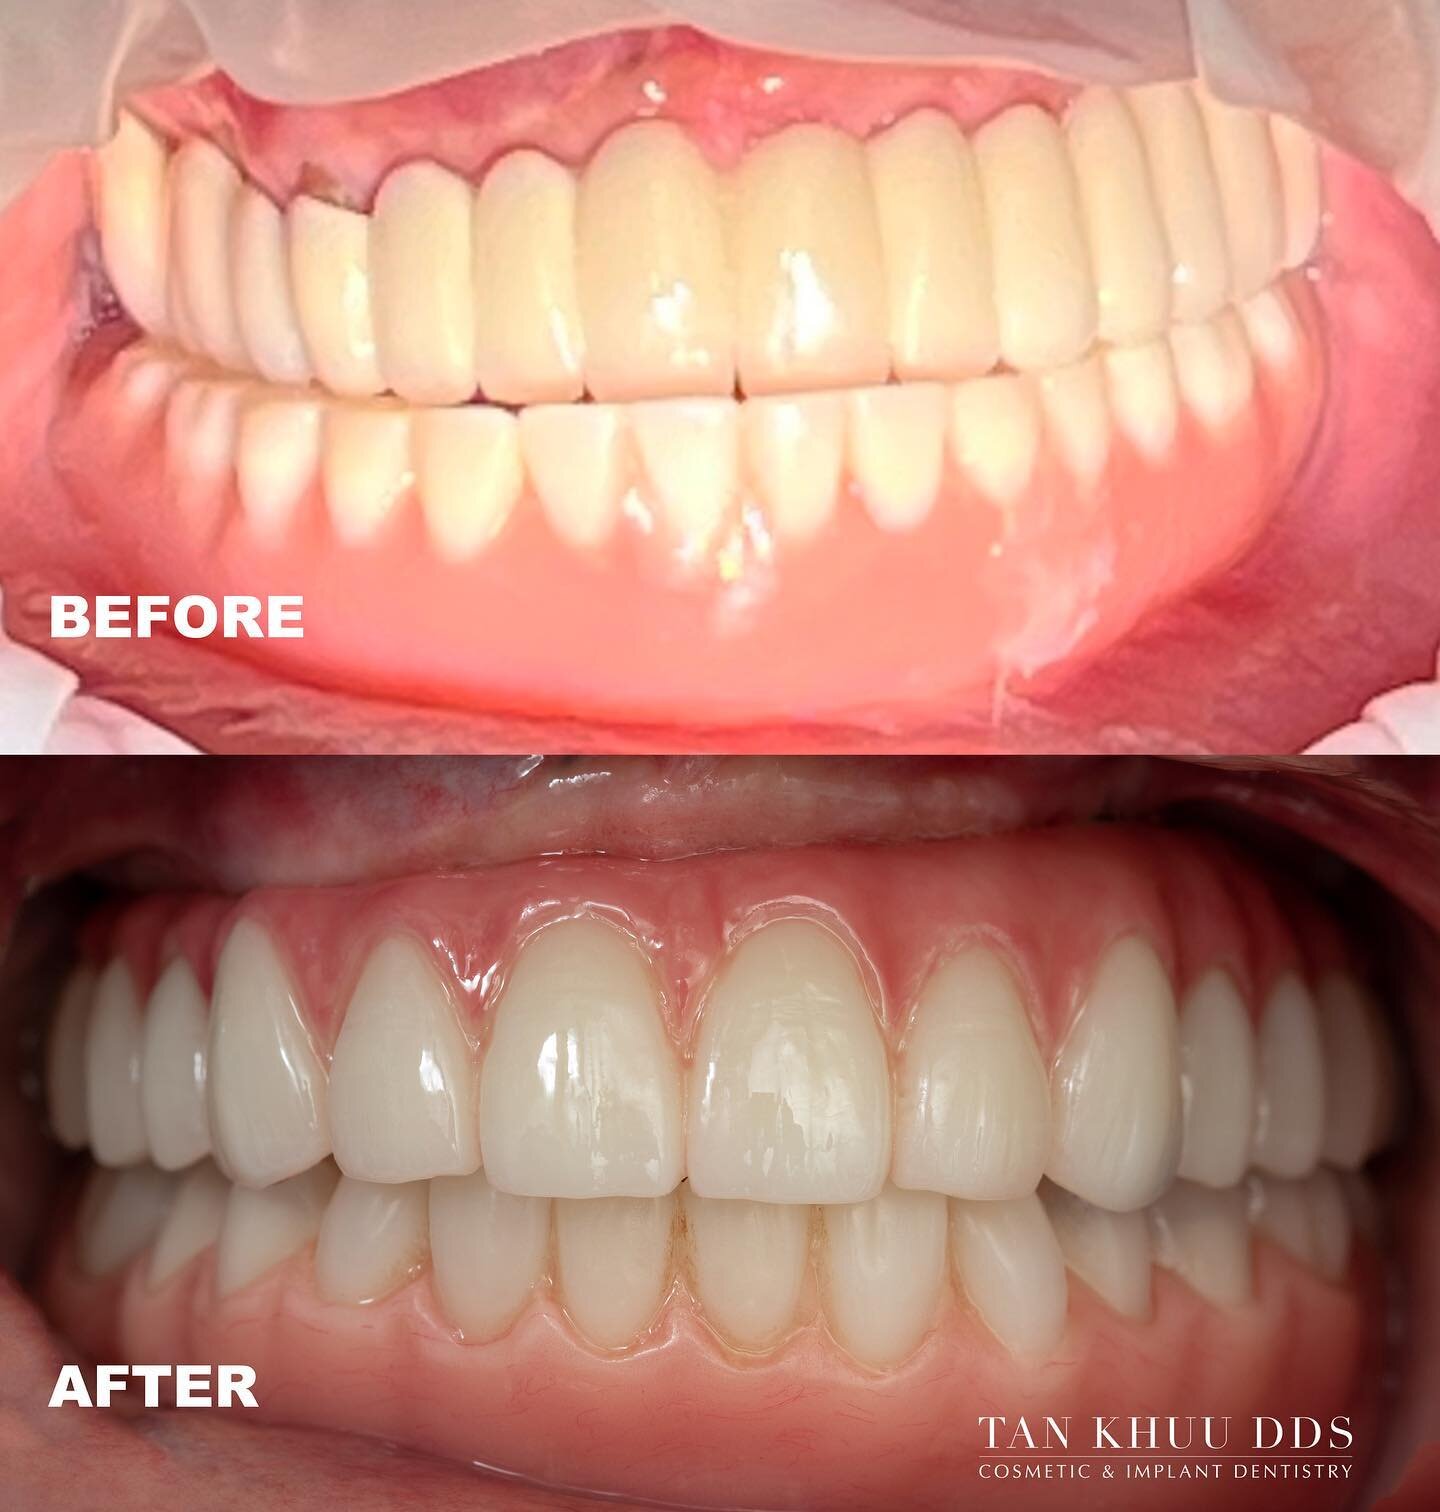 This patient came into our office from out-of-state with difficulty chewing. He felt that his upper teeth were loose and complained that his lower denture kept sliding around when he tries to chew. 

Impressions of his current teeth and bite were tak